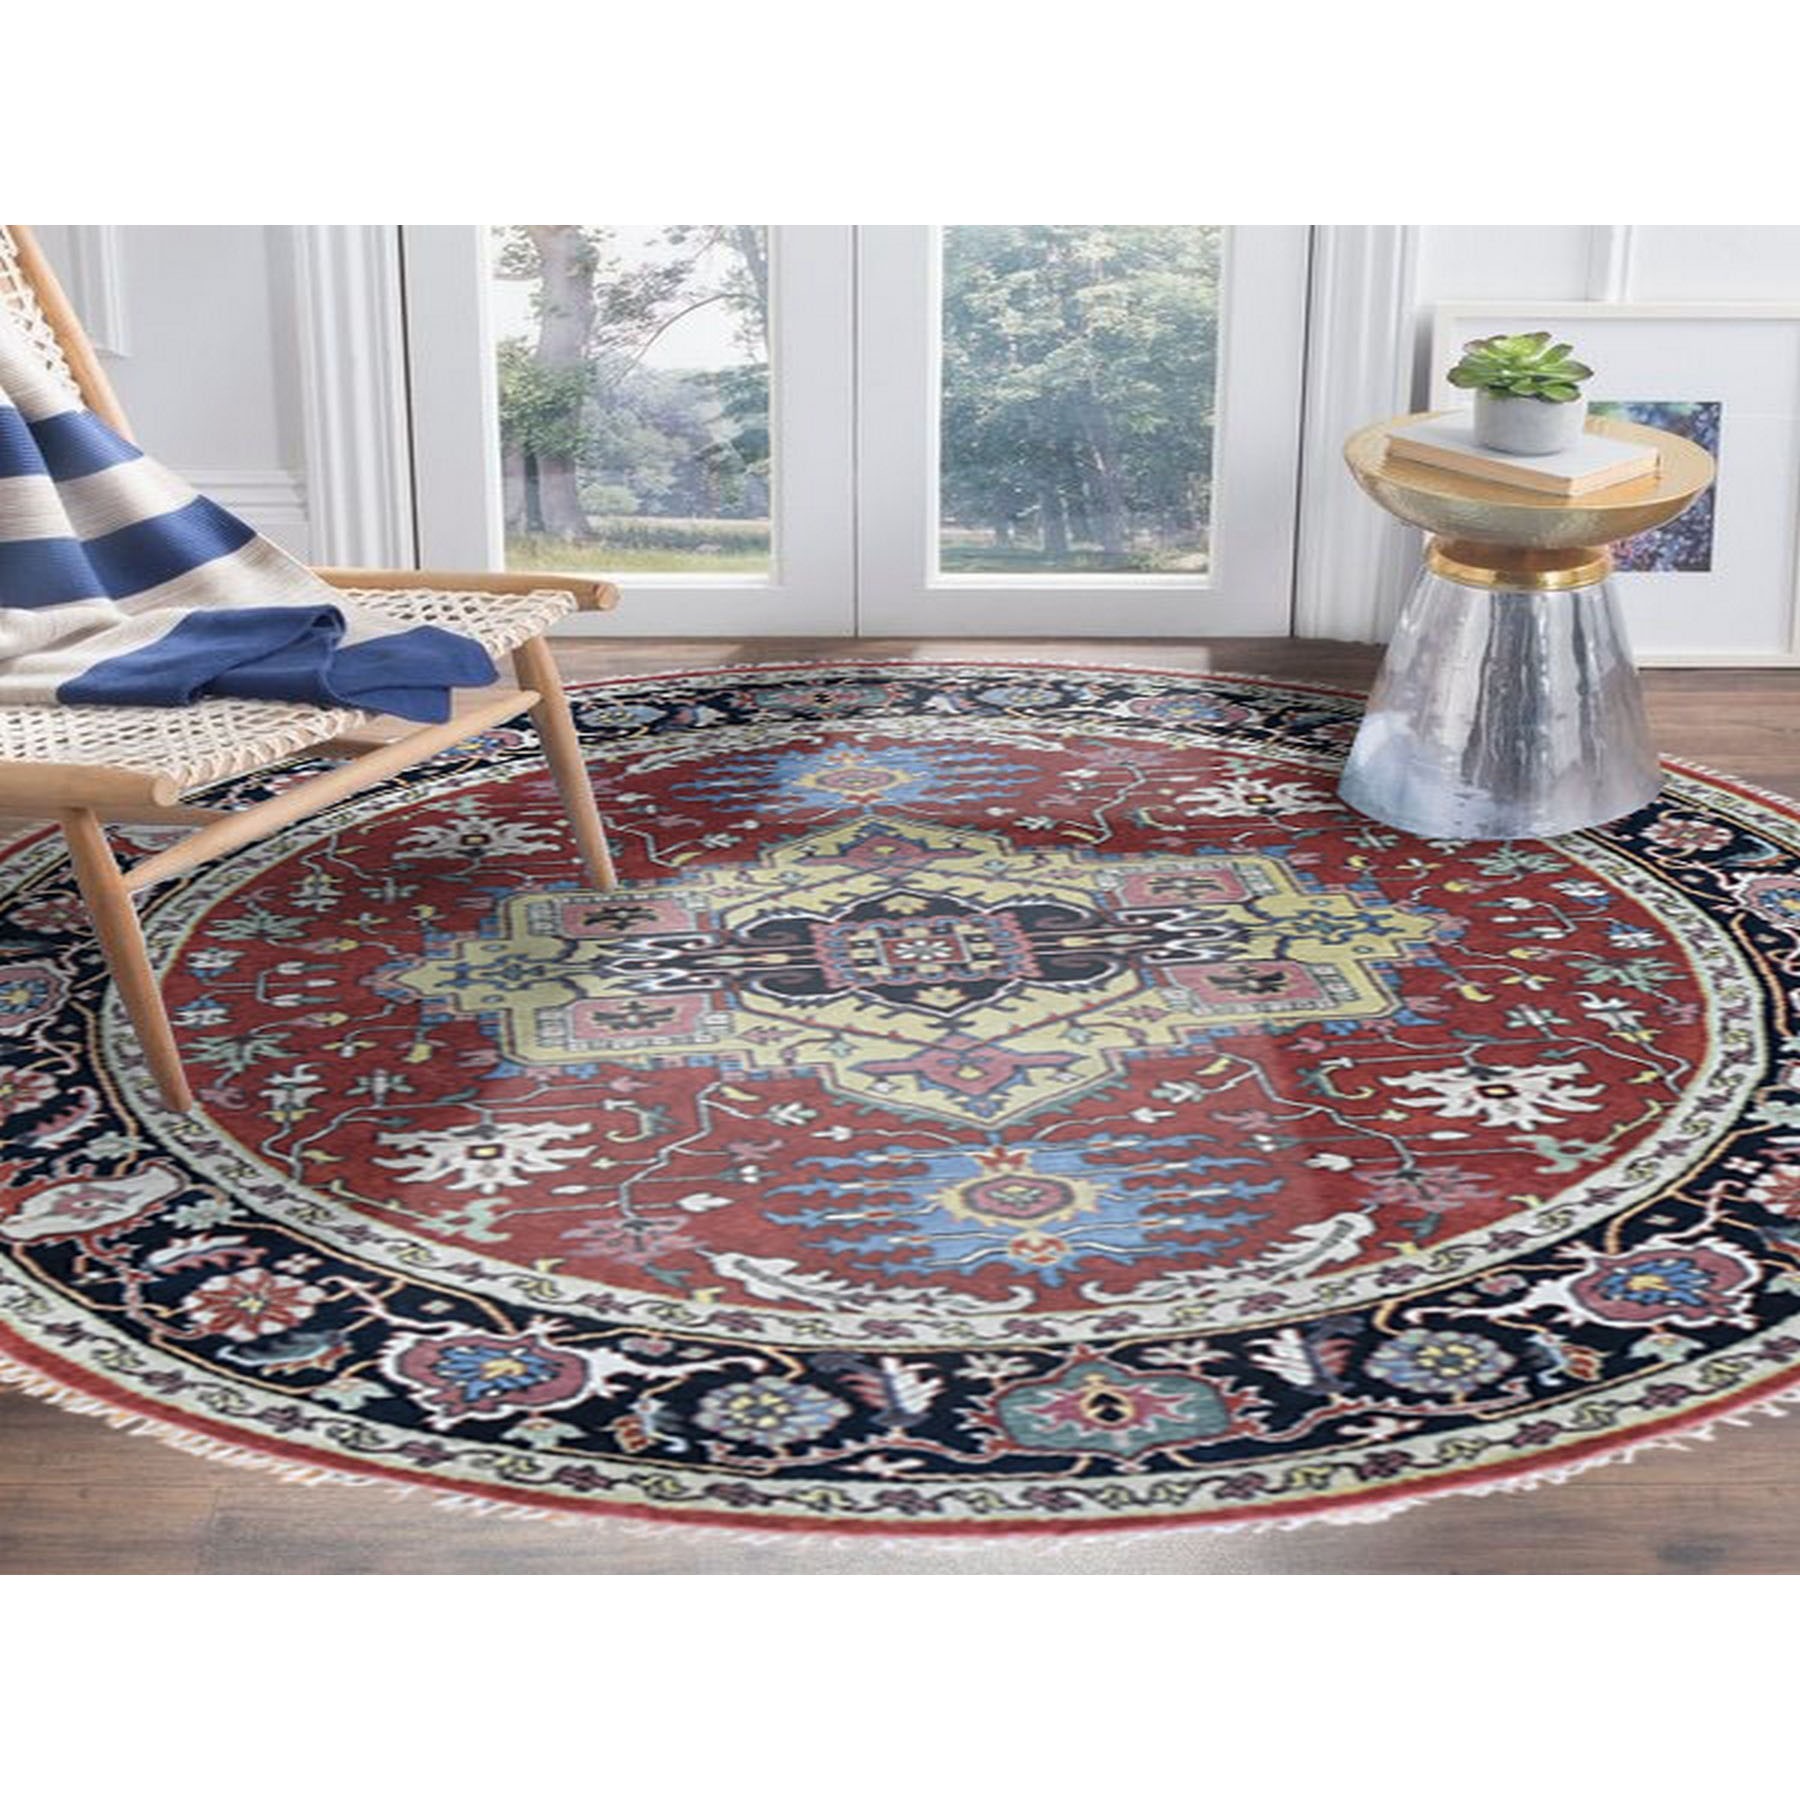 7-10 x7-10  Round Red Heriz Revival Pure Wool Hand Knotted Oriental Rug 